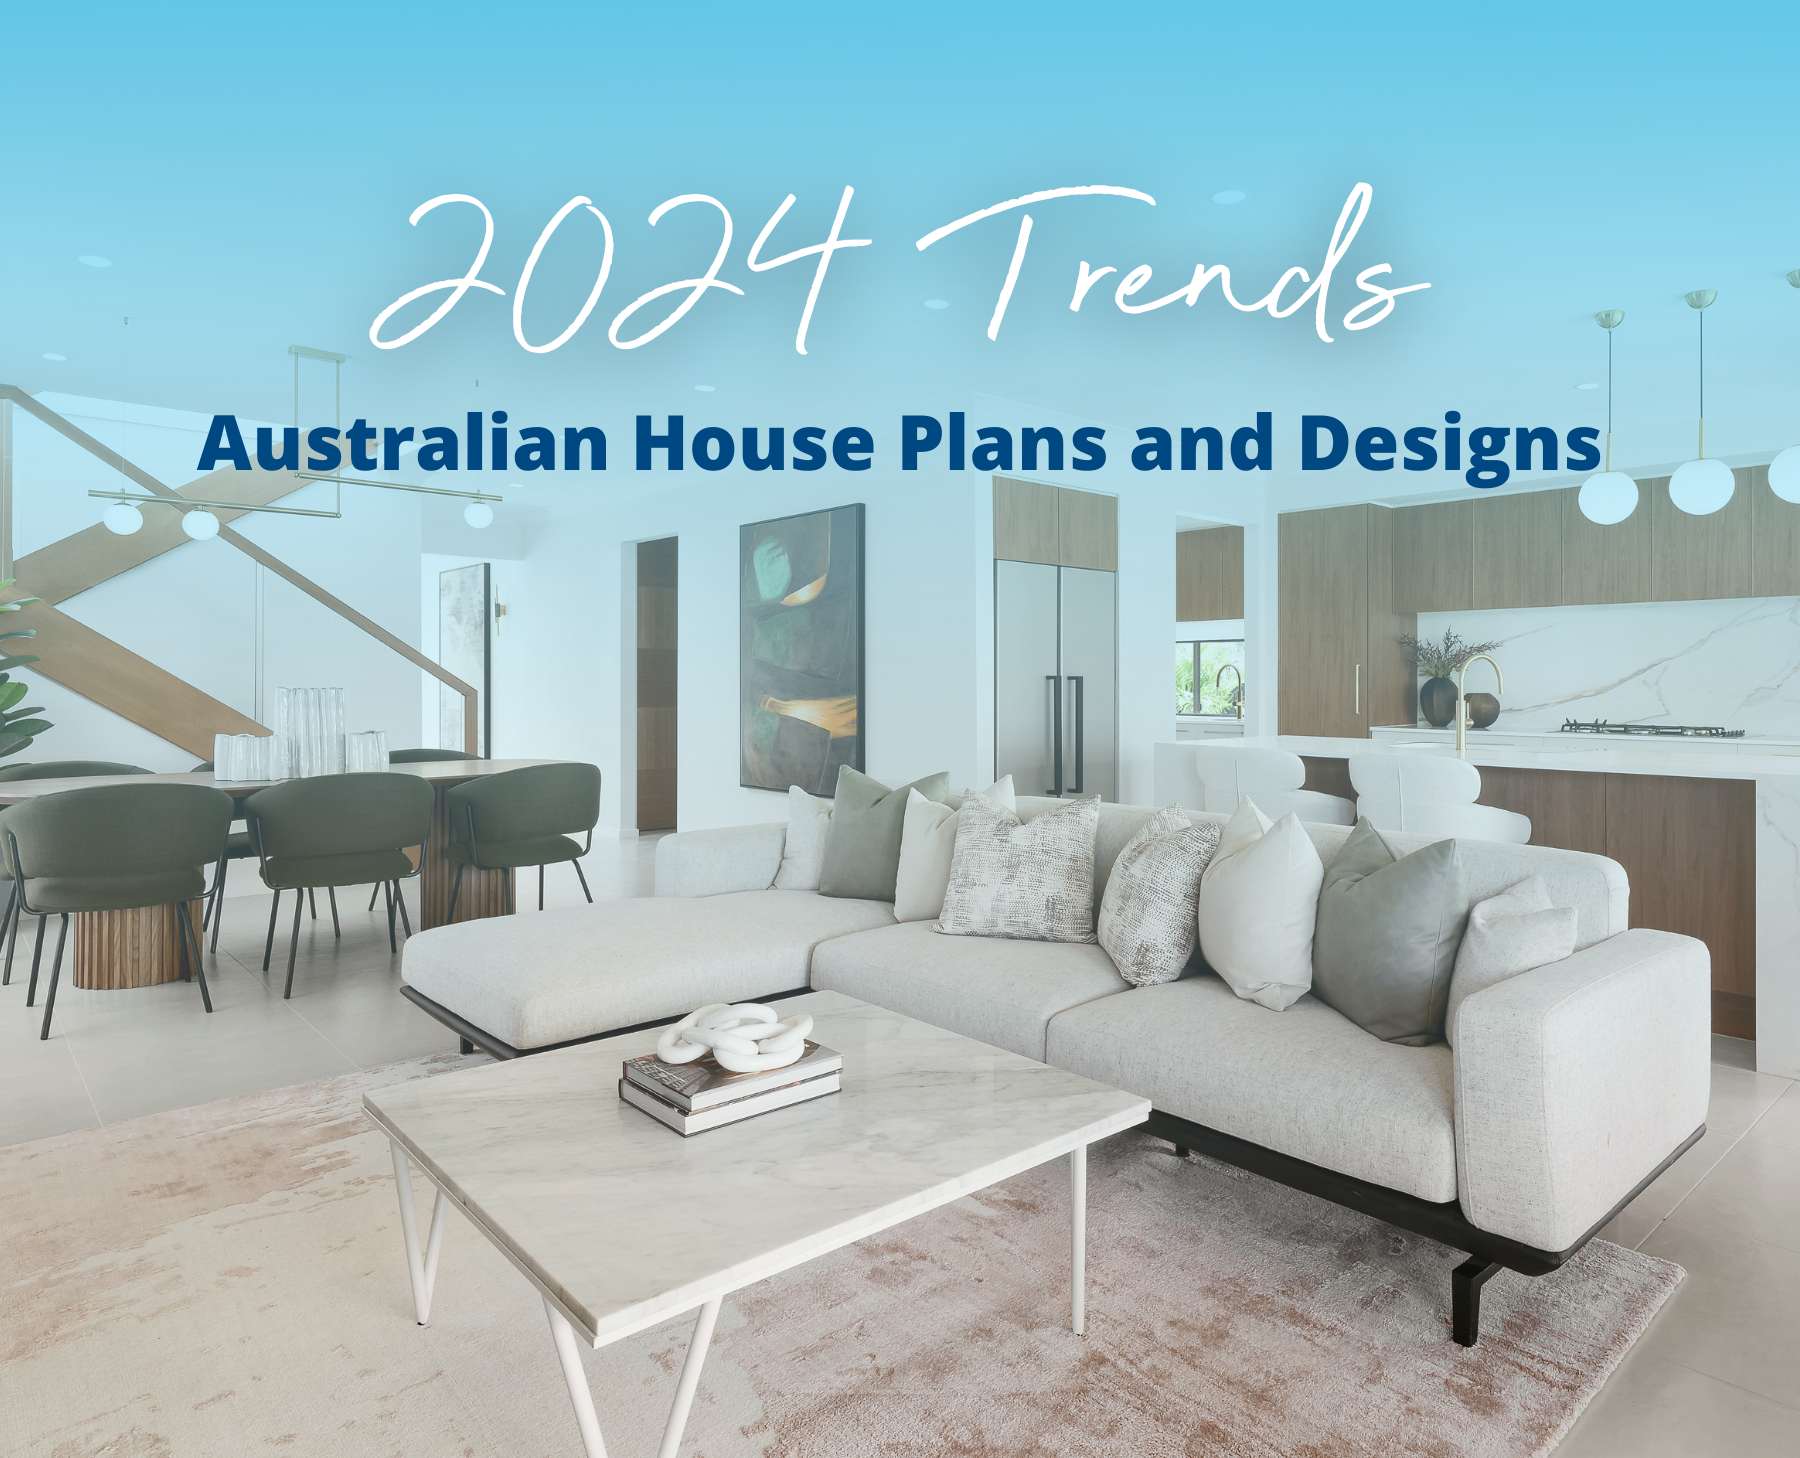 Latest Trends in Australian House Plans and Designs